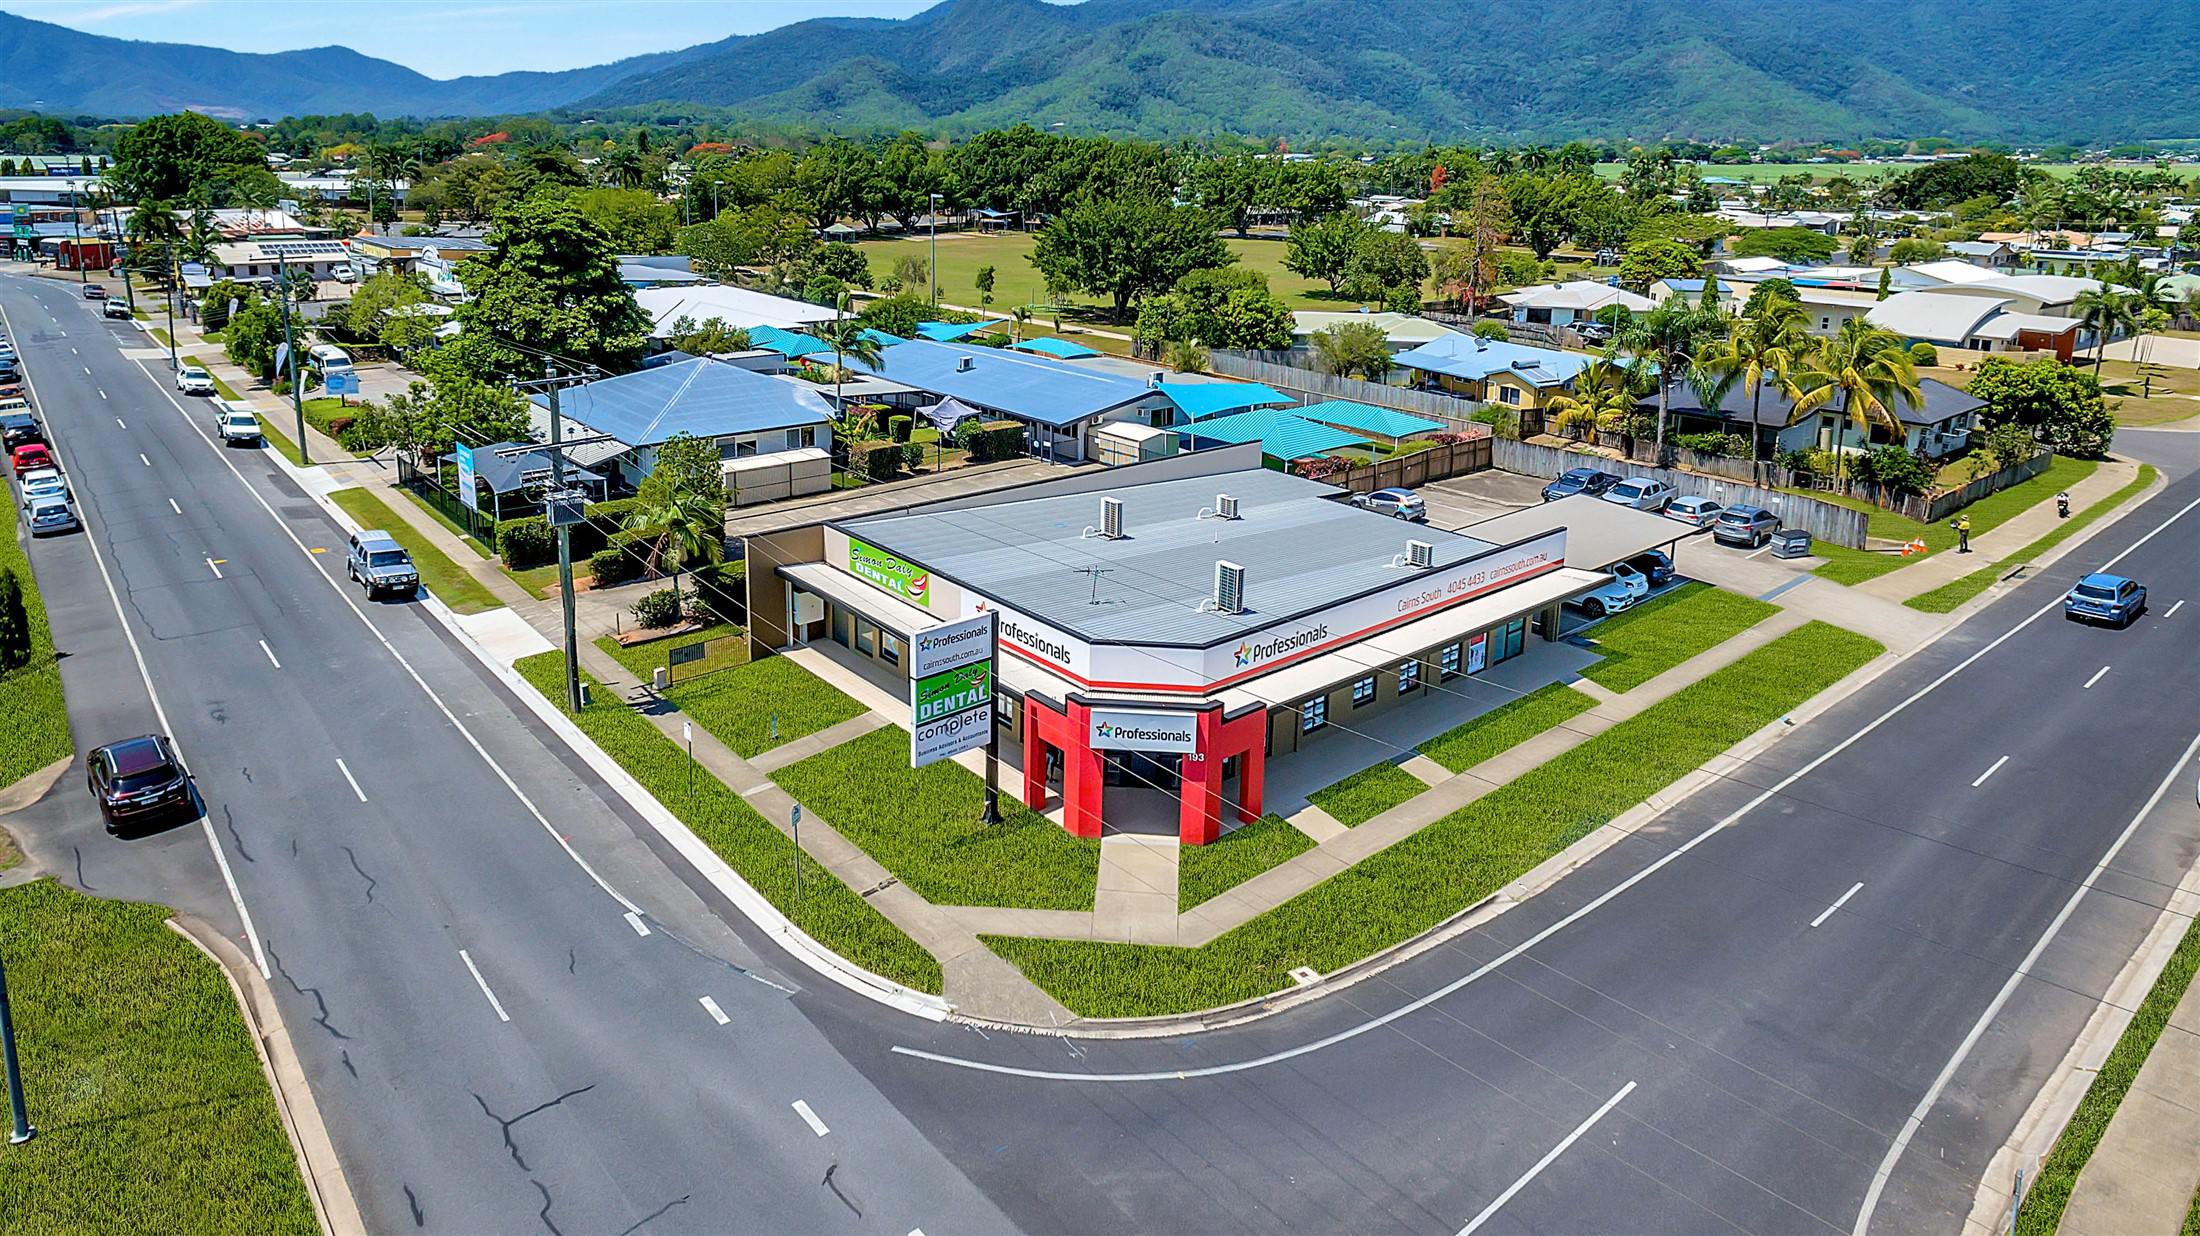 Images Professionals Cairns South Real Estate